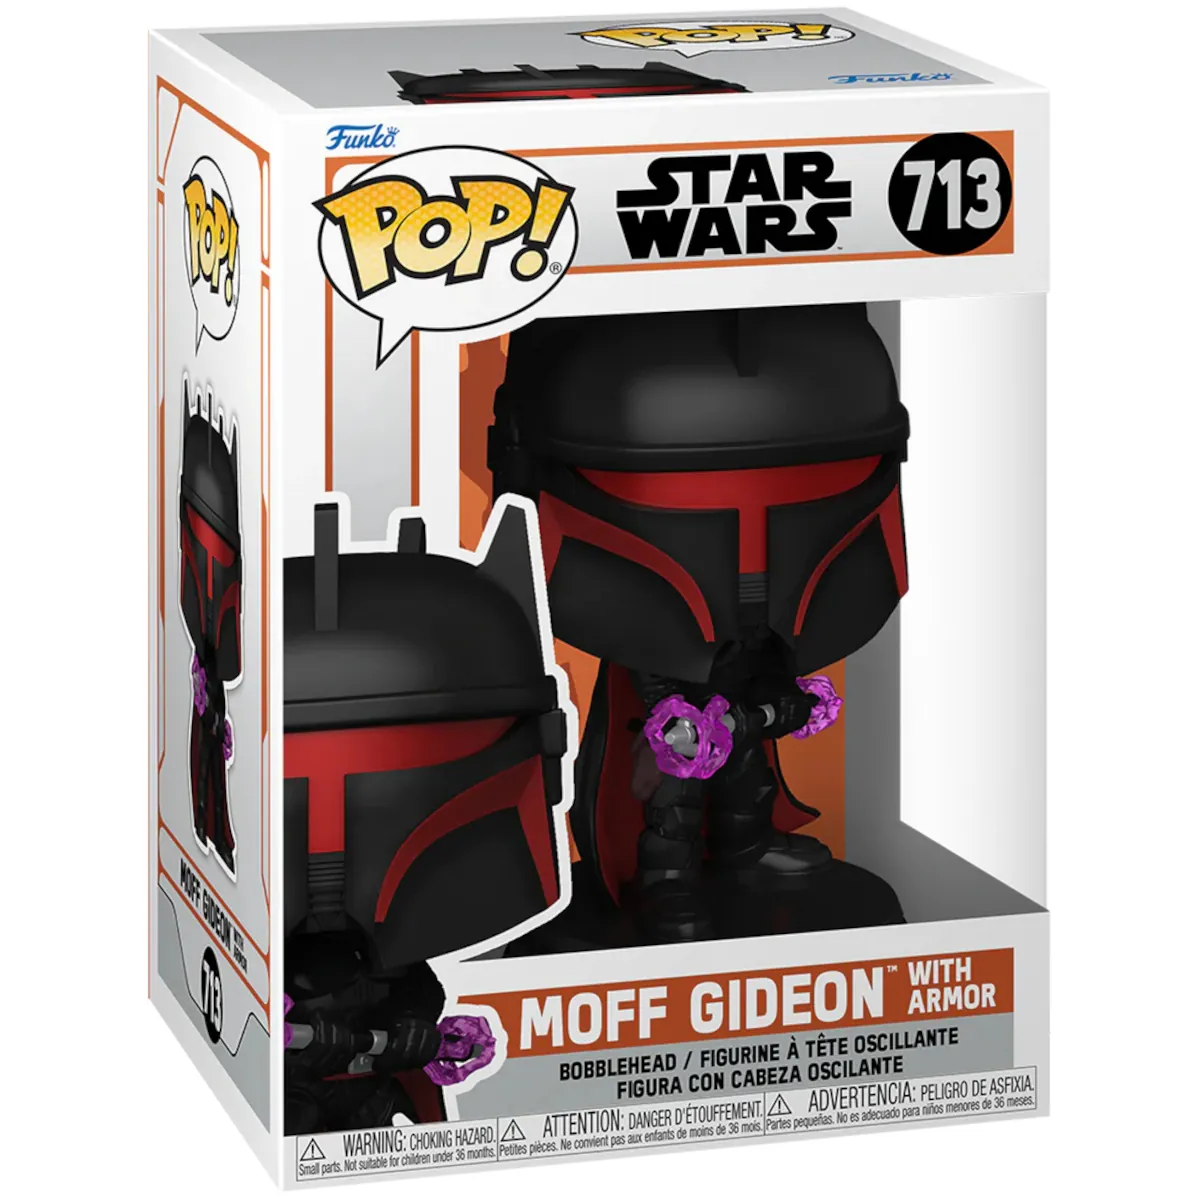 80005 Funko Pop! Television - Star Wars The Mandalorian - Moff Gideon with Armor Collectable Vinyl Figure Box Front